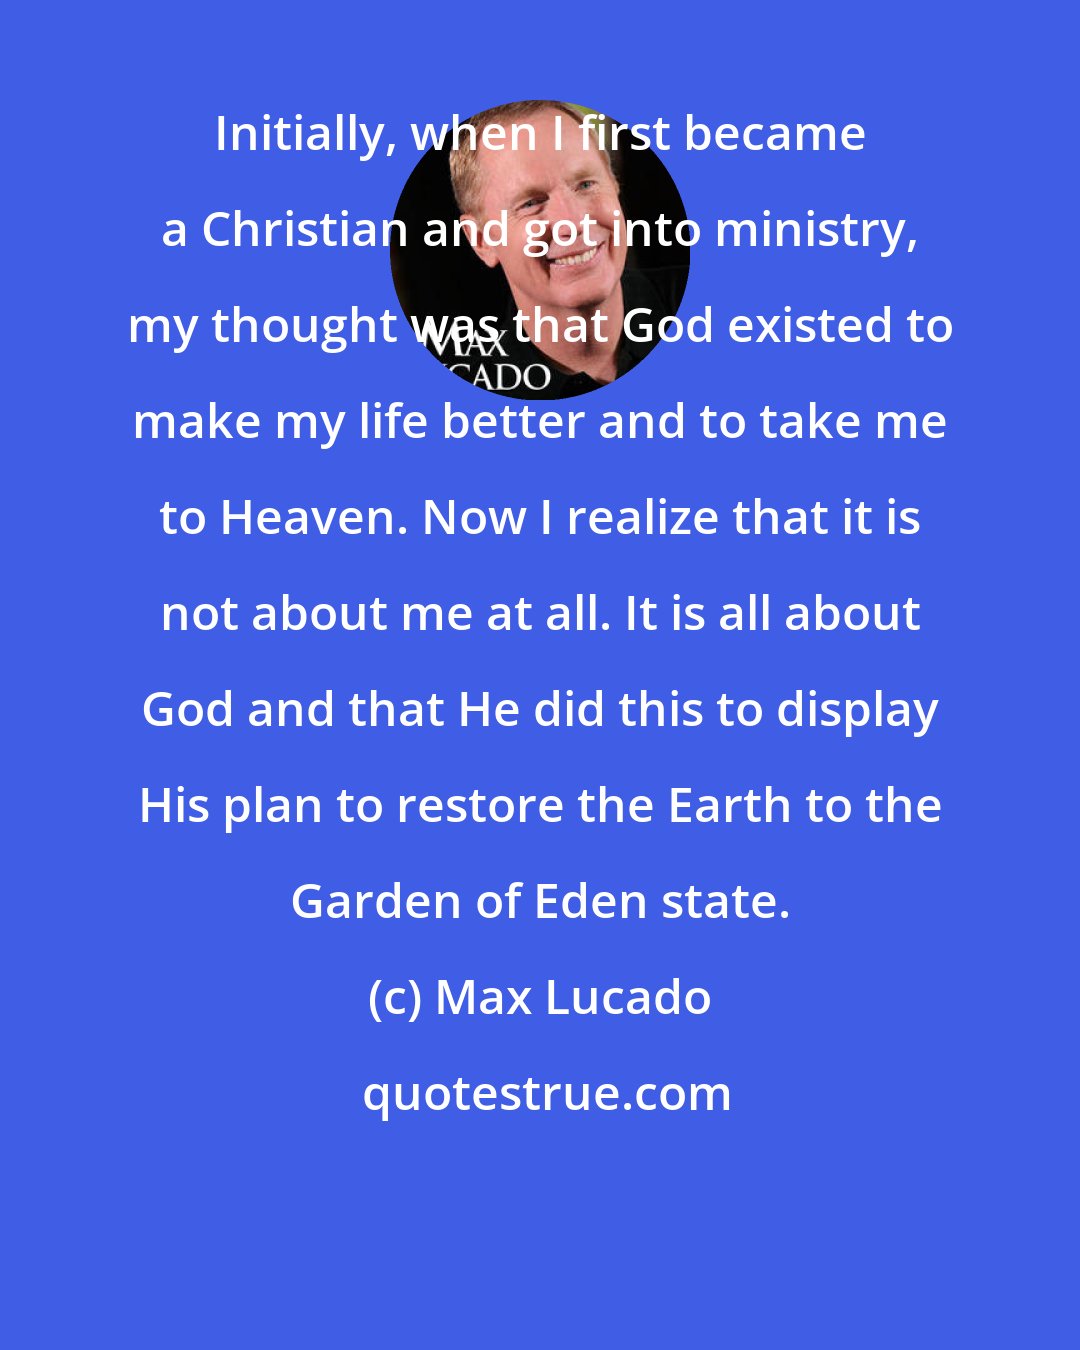 Max Lucado: Initially, when I first became a Christian and got into ministry, my thought was that God existed to make my life better and to take me to Heaven. Now I realize that it is not about me at all. It is all about God and that He did this to display His plan to restore the Earth to the Garden of Eden state.